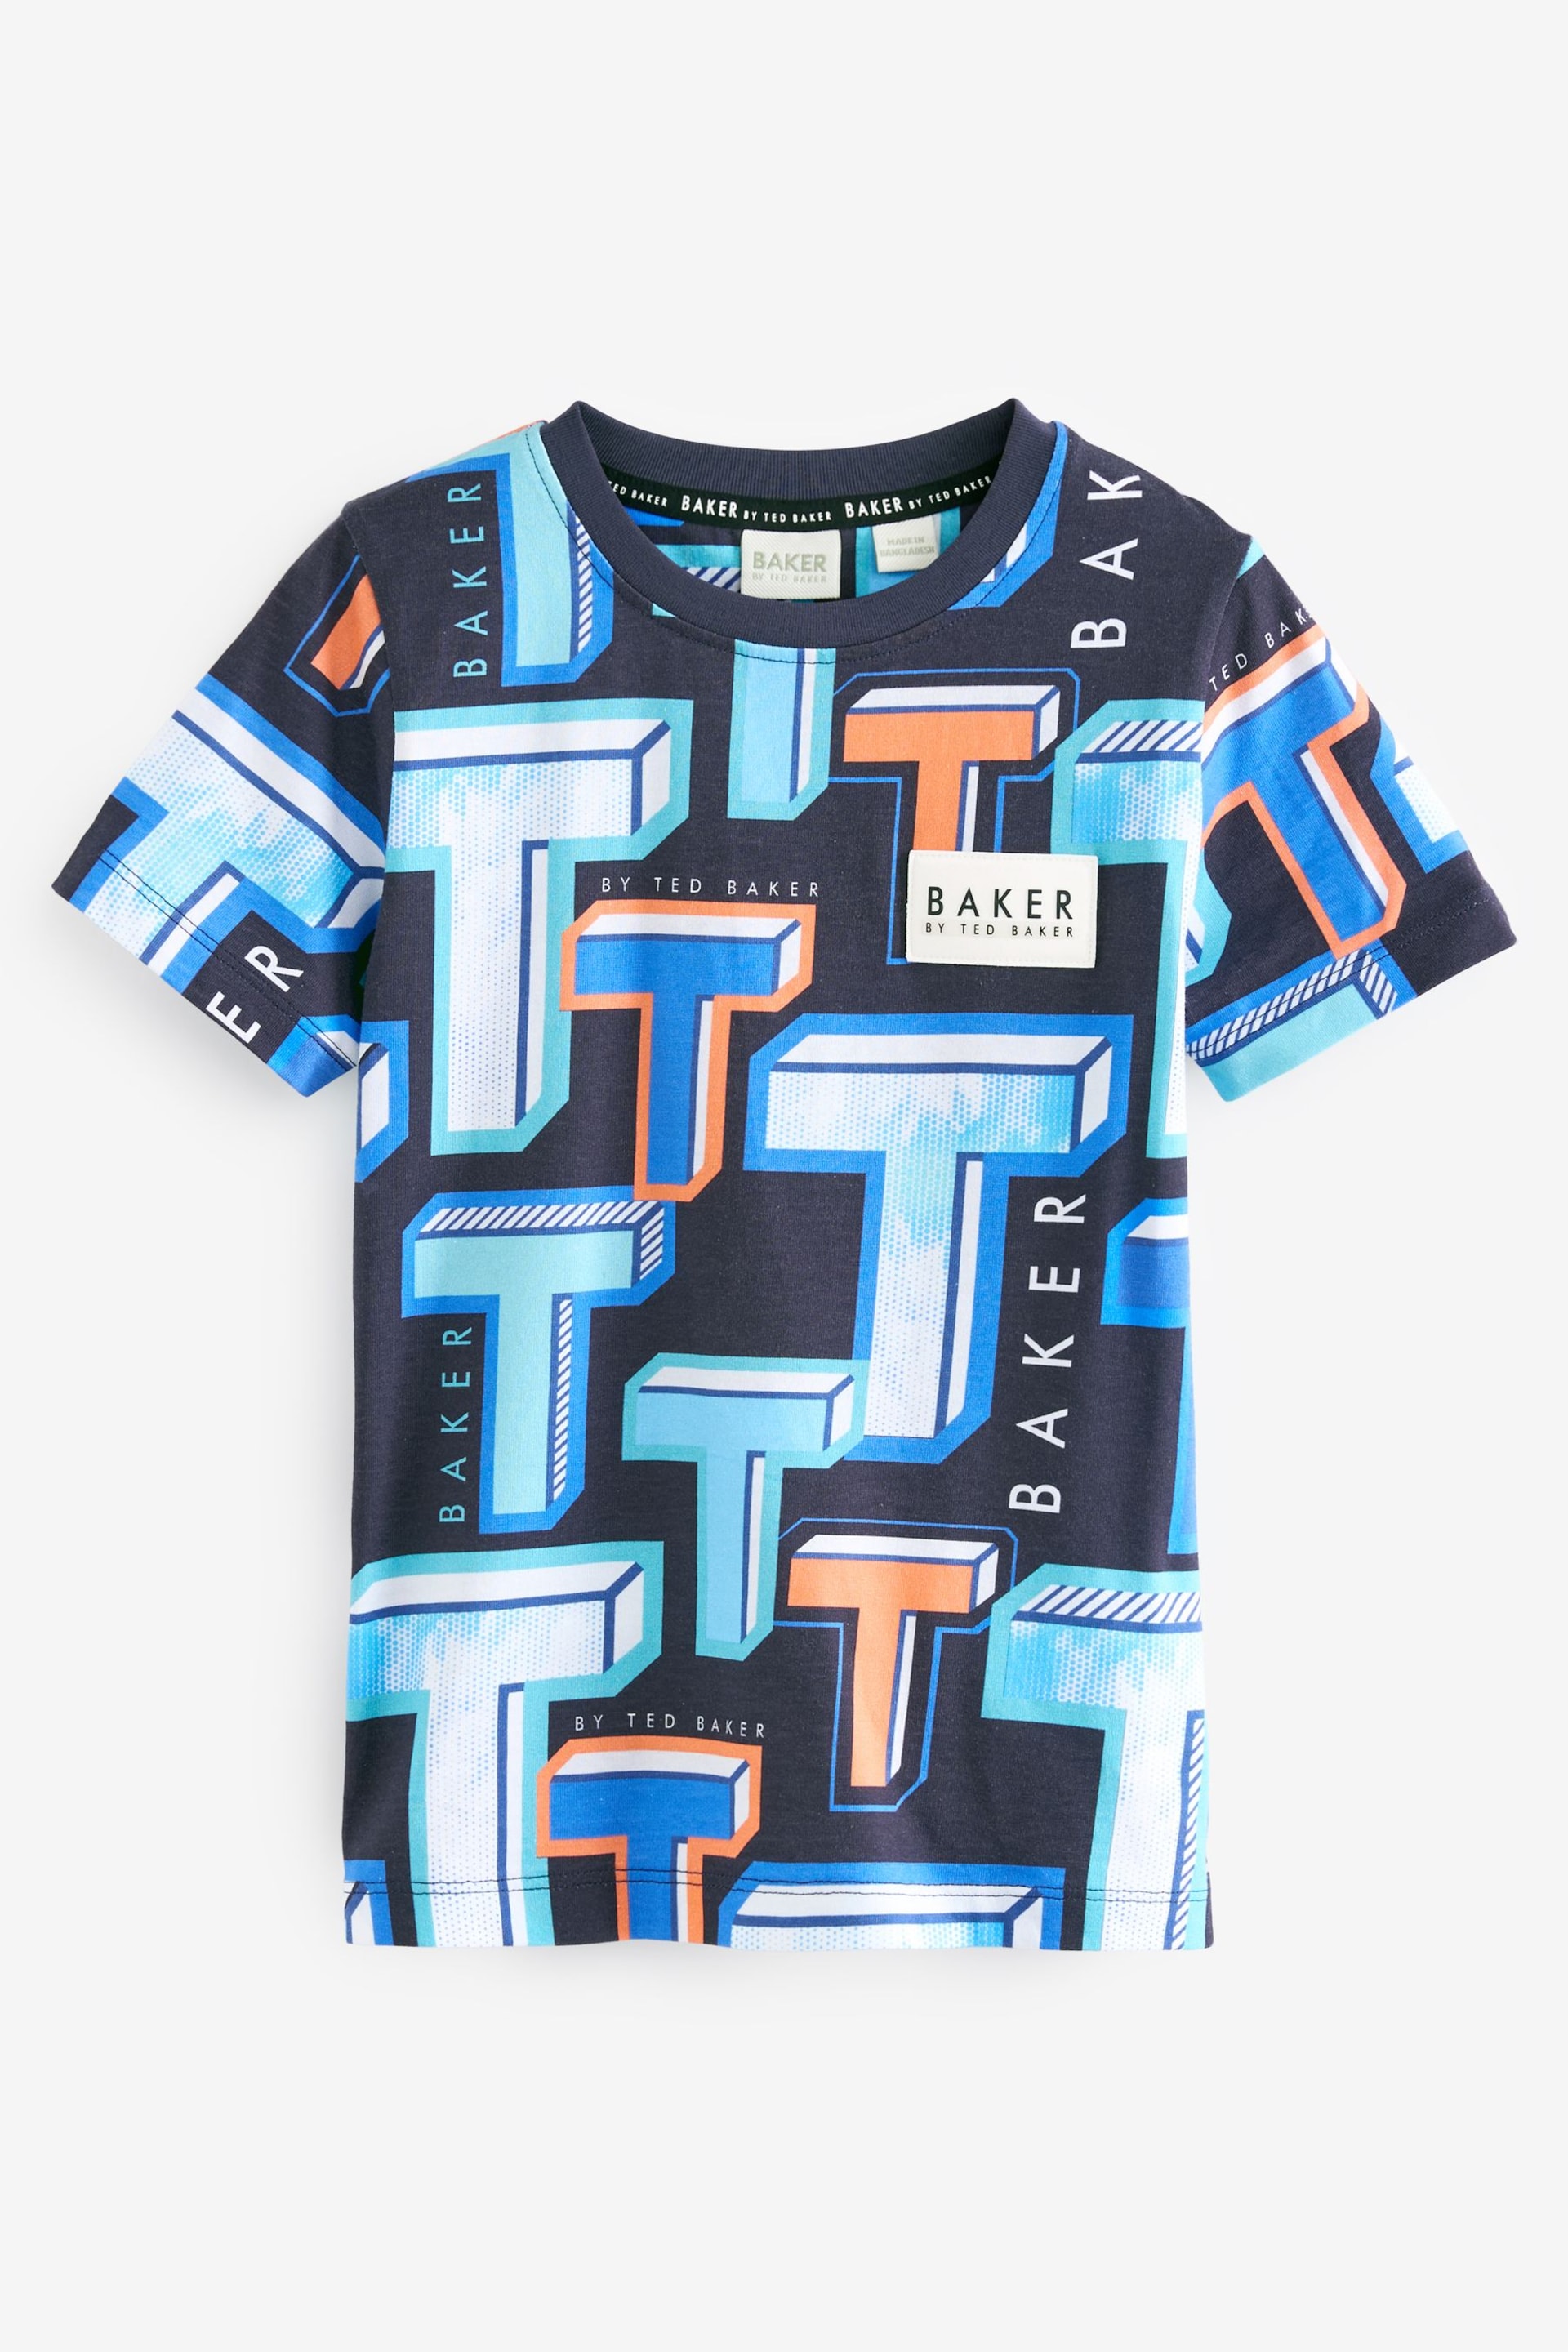 Baker by Ted Baker Graphic T-Shirt - Image 9 of 9